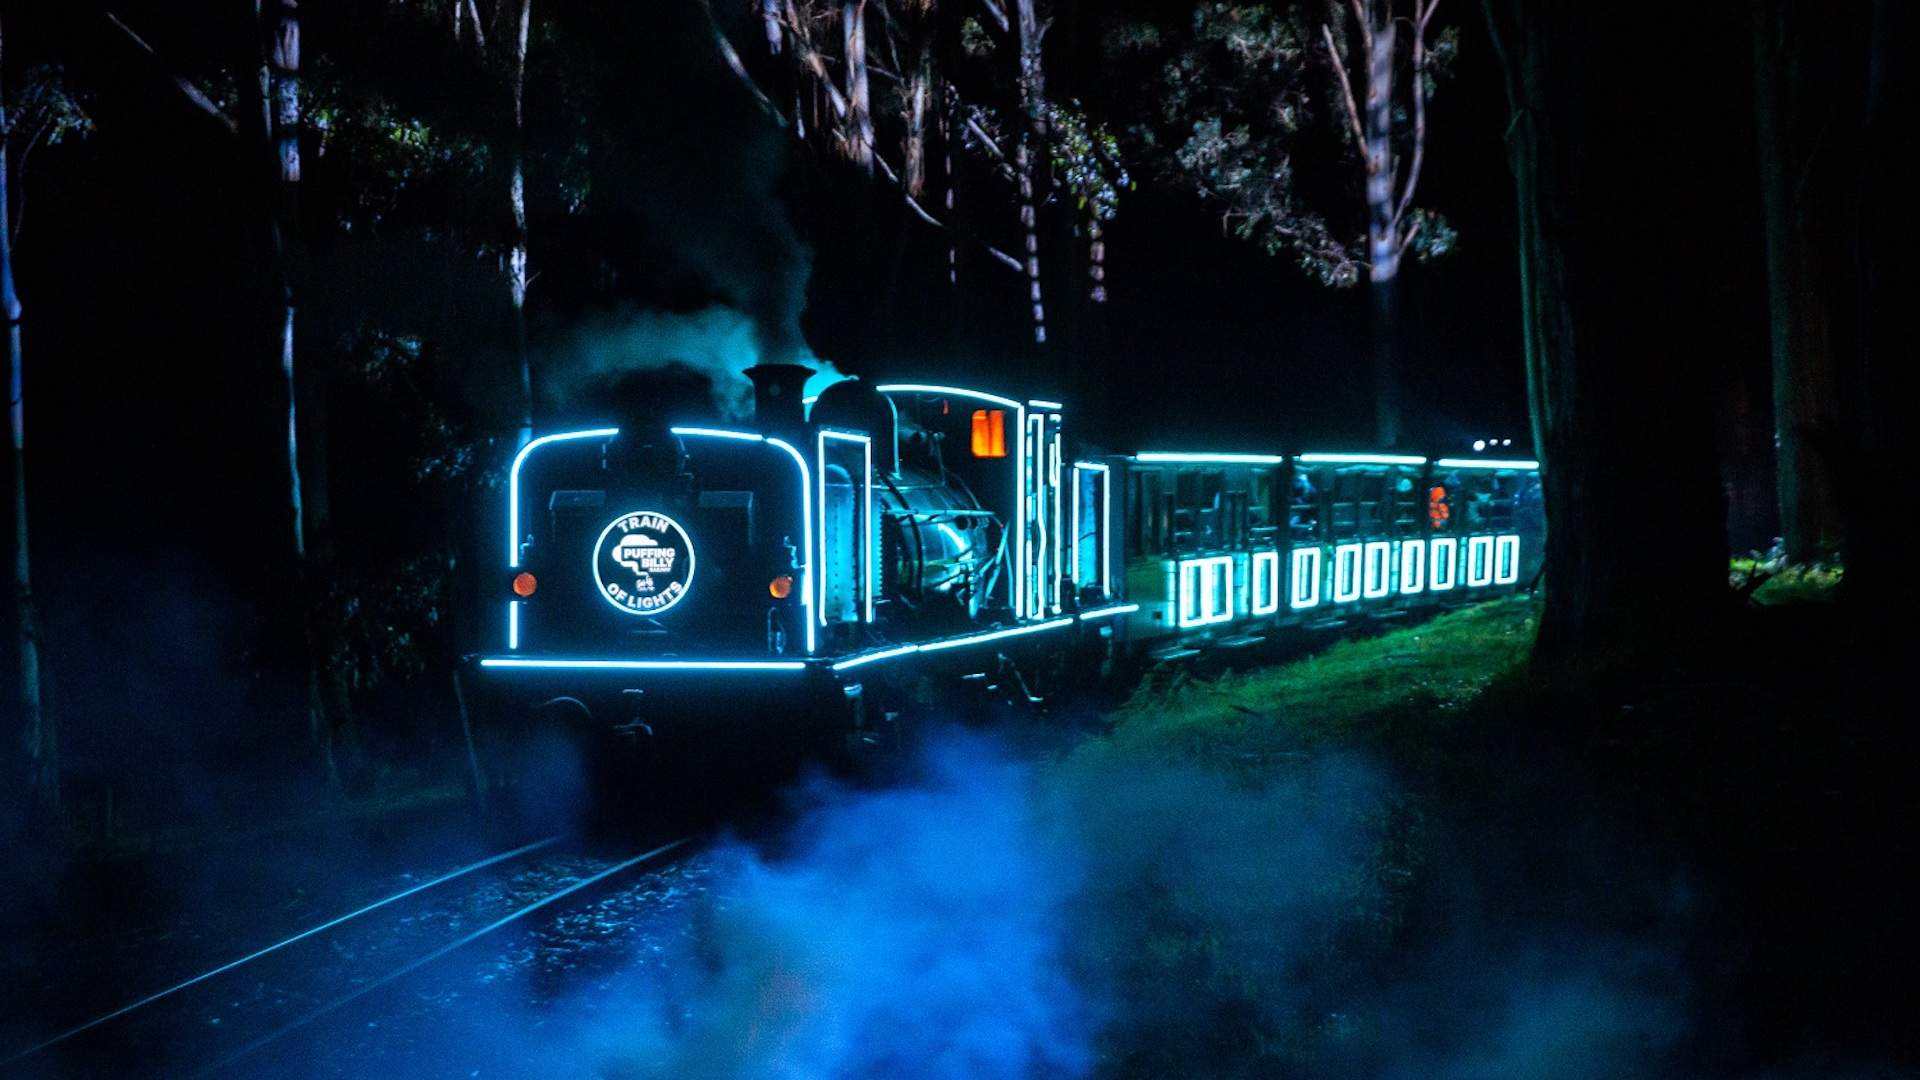 All Aboard: Puffing Billy Is Getting Transformed with Another Immersive Light Experience